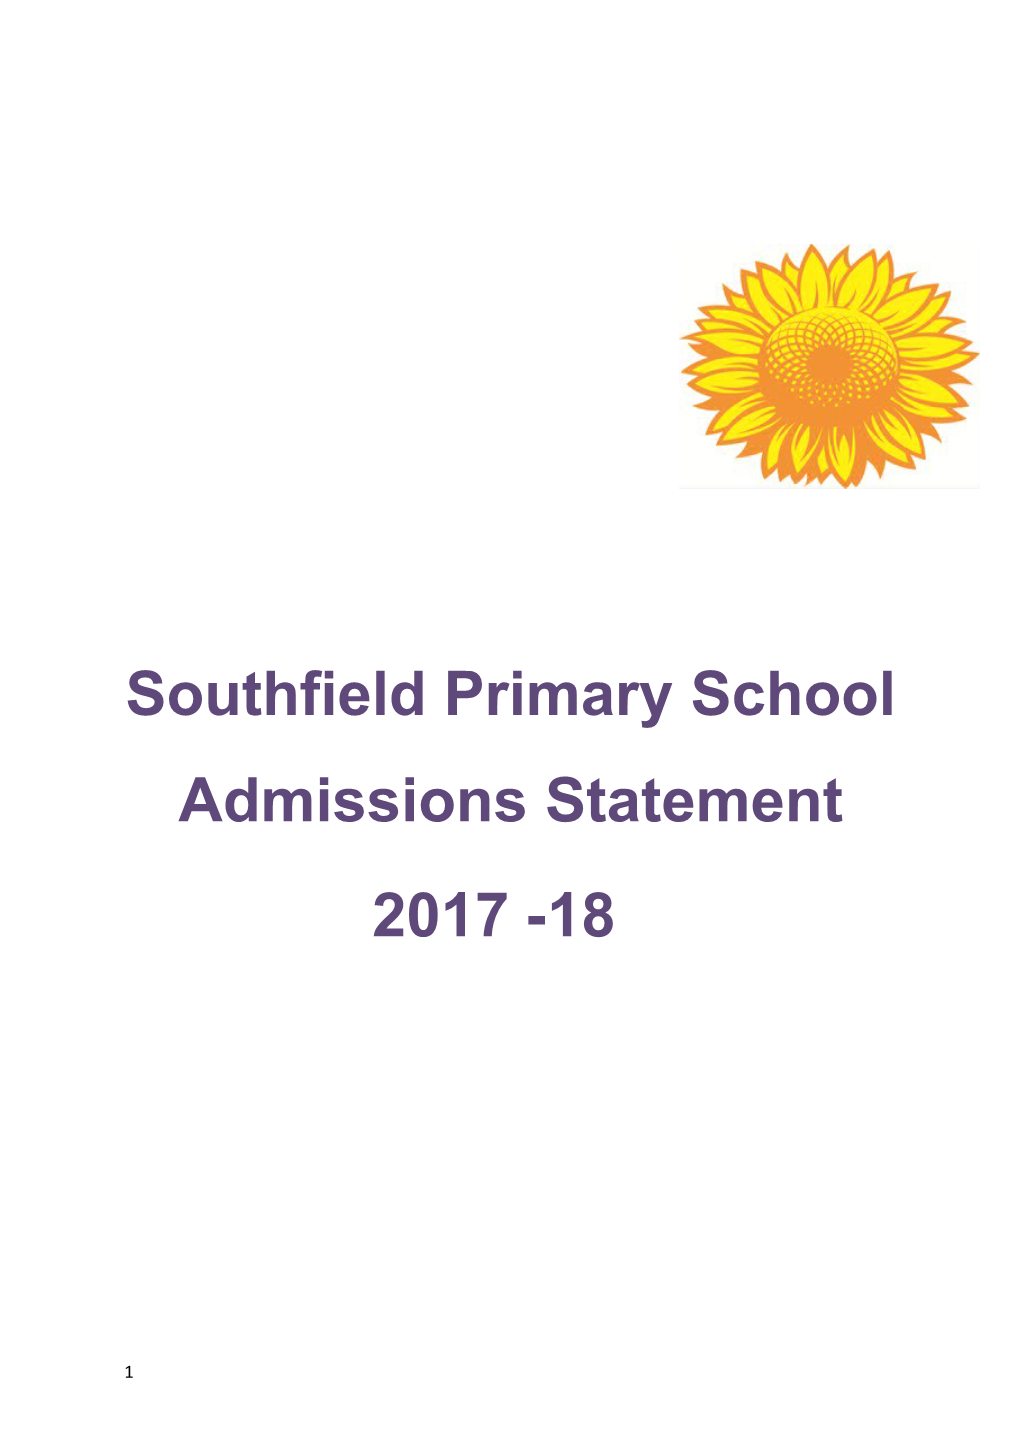 Southfield Primary School Admissions Statement